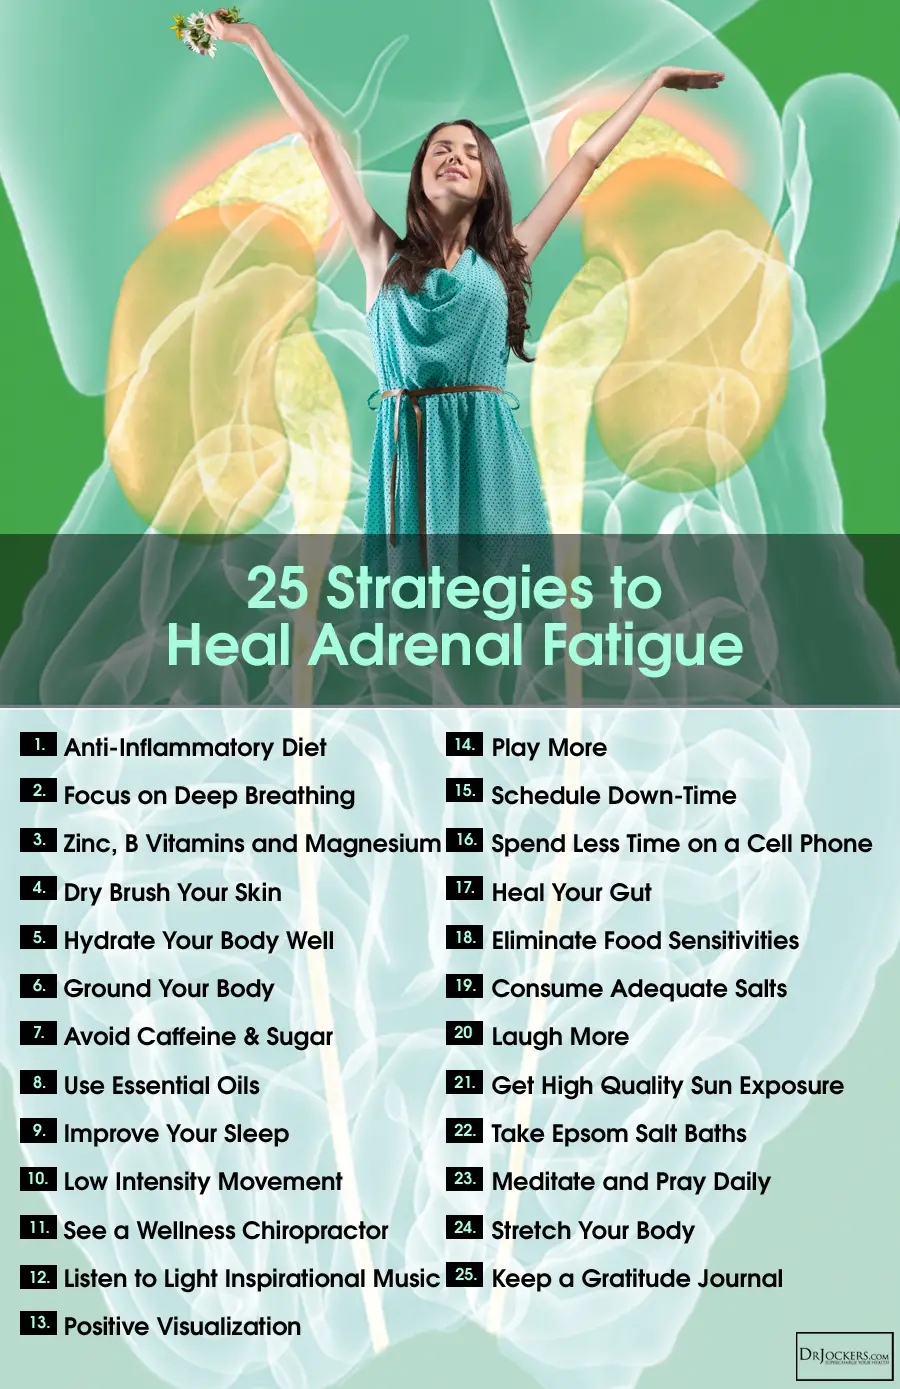 25 Lifestyle Strategies to Heal Adrenal Fatigue Naturally